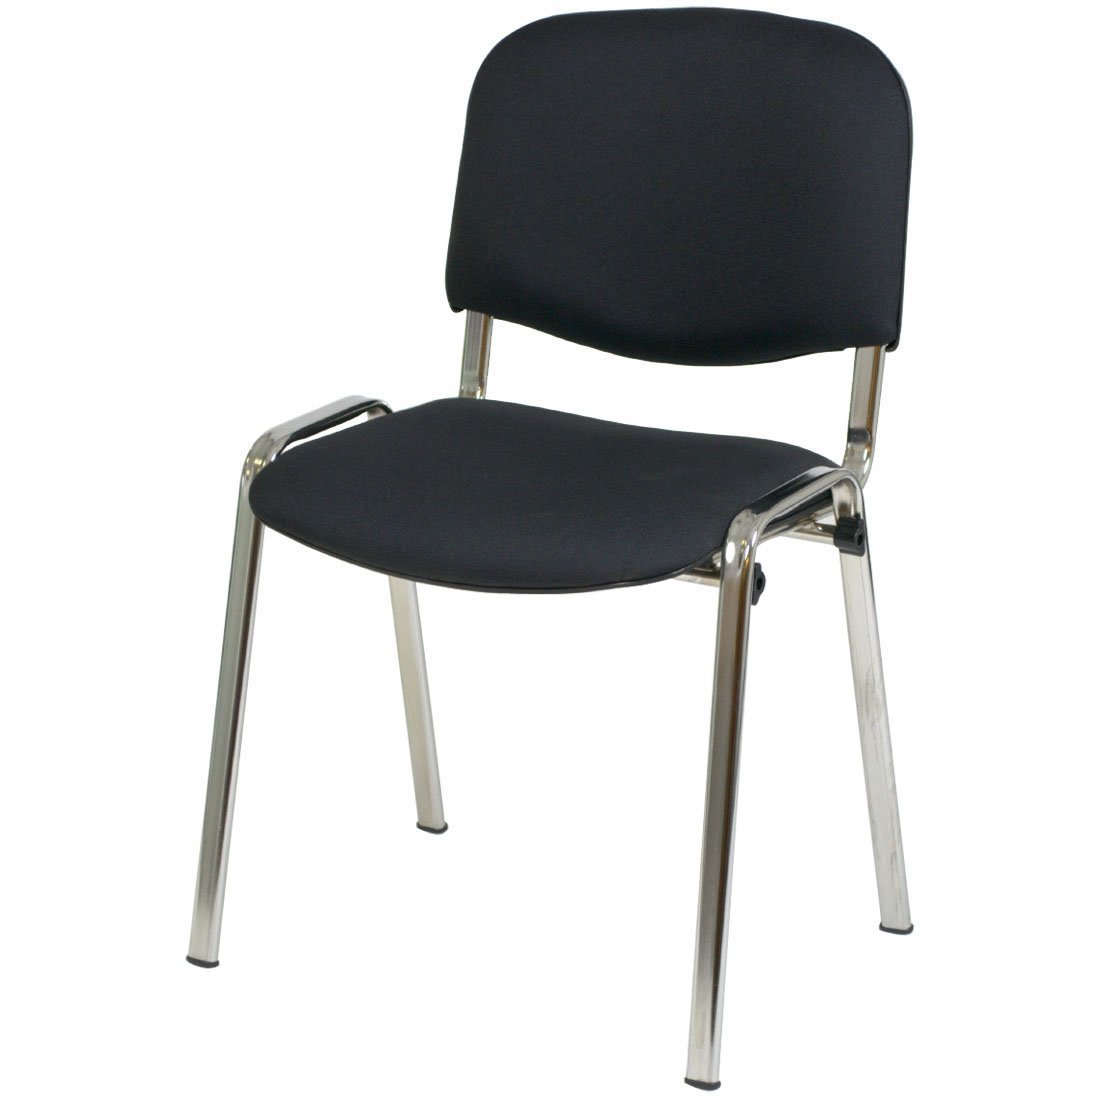 Image result for iso meeting chair